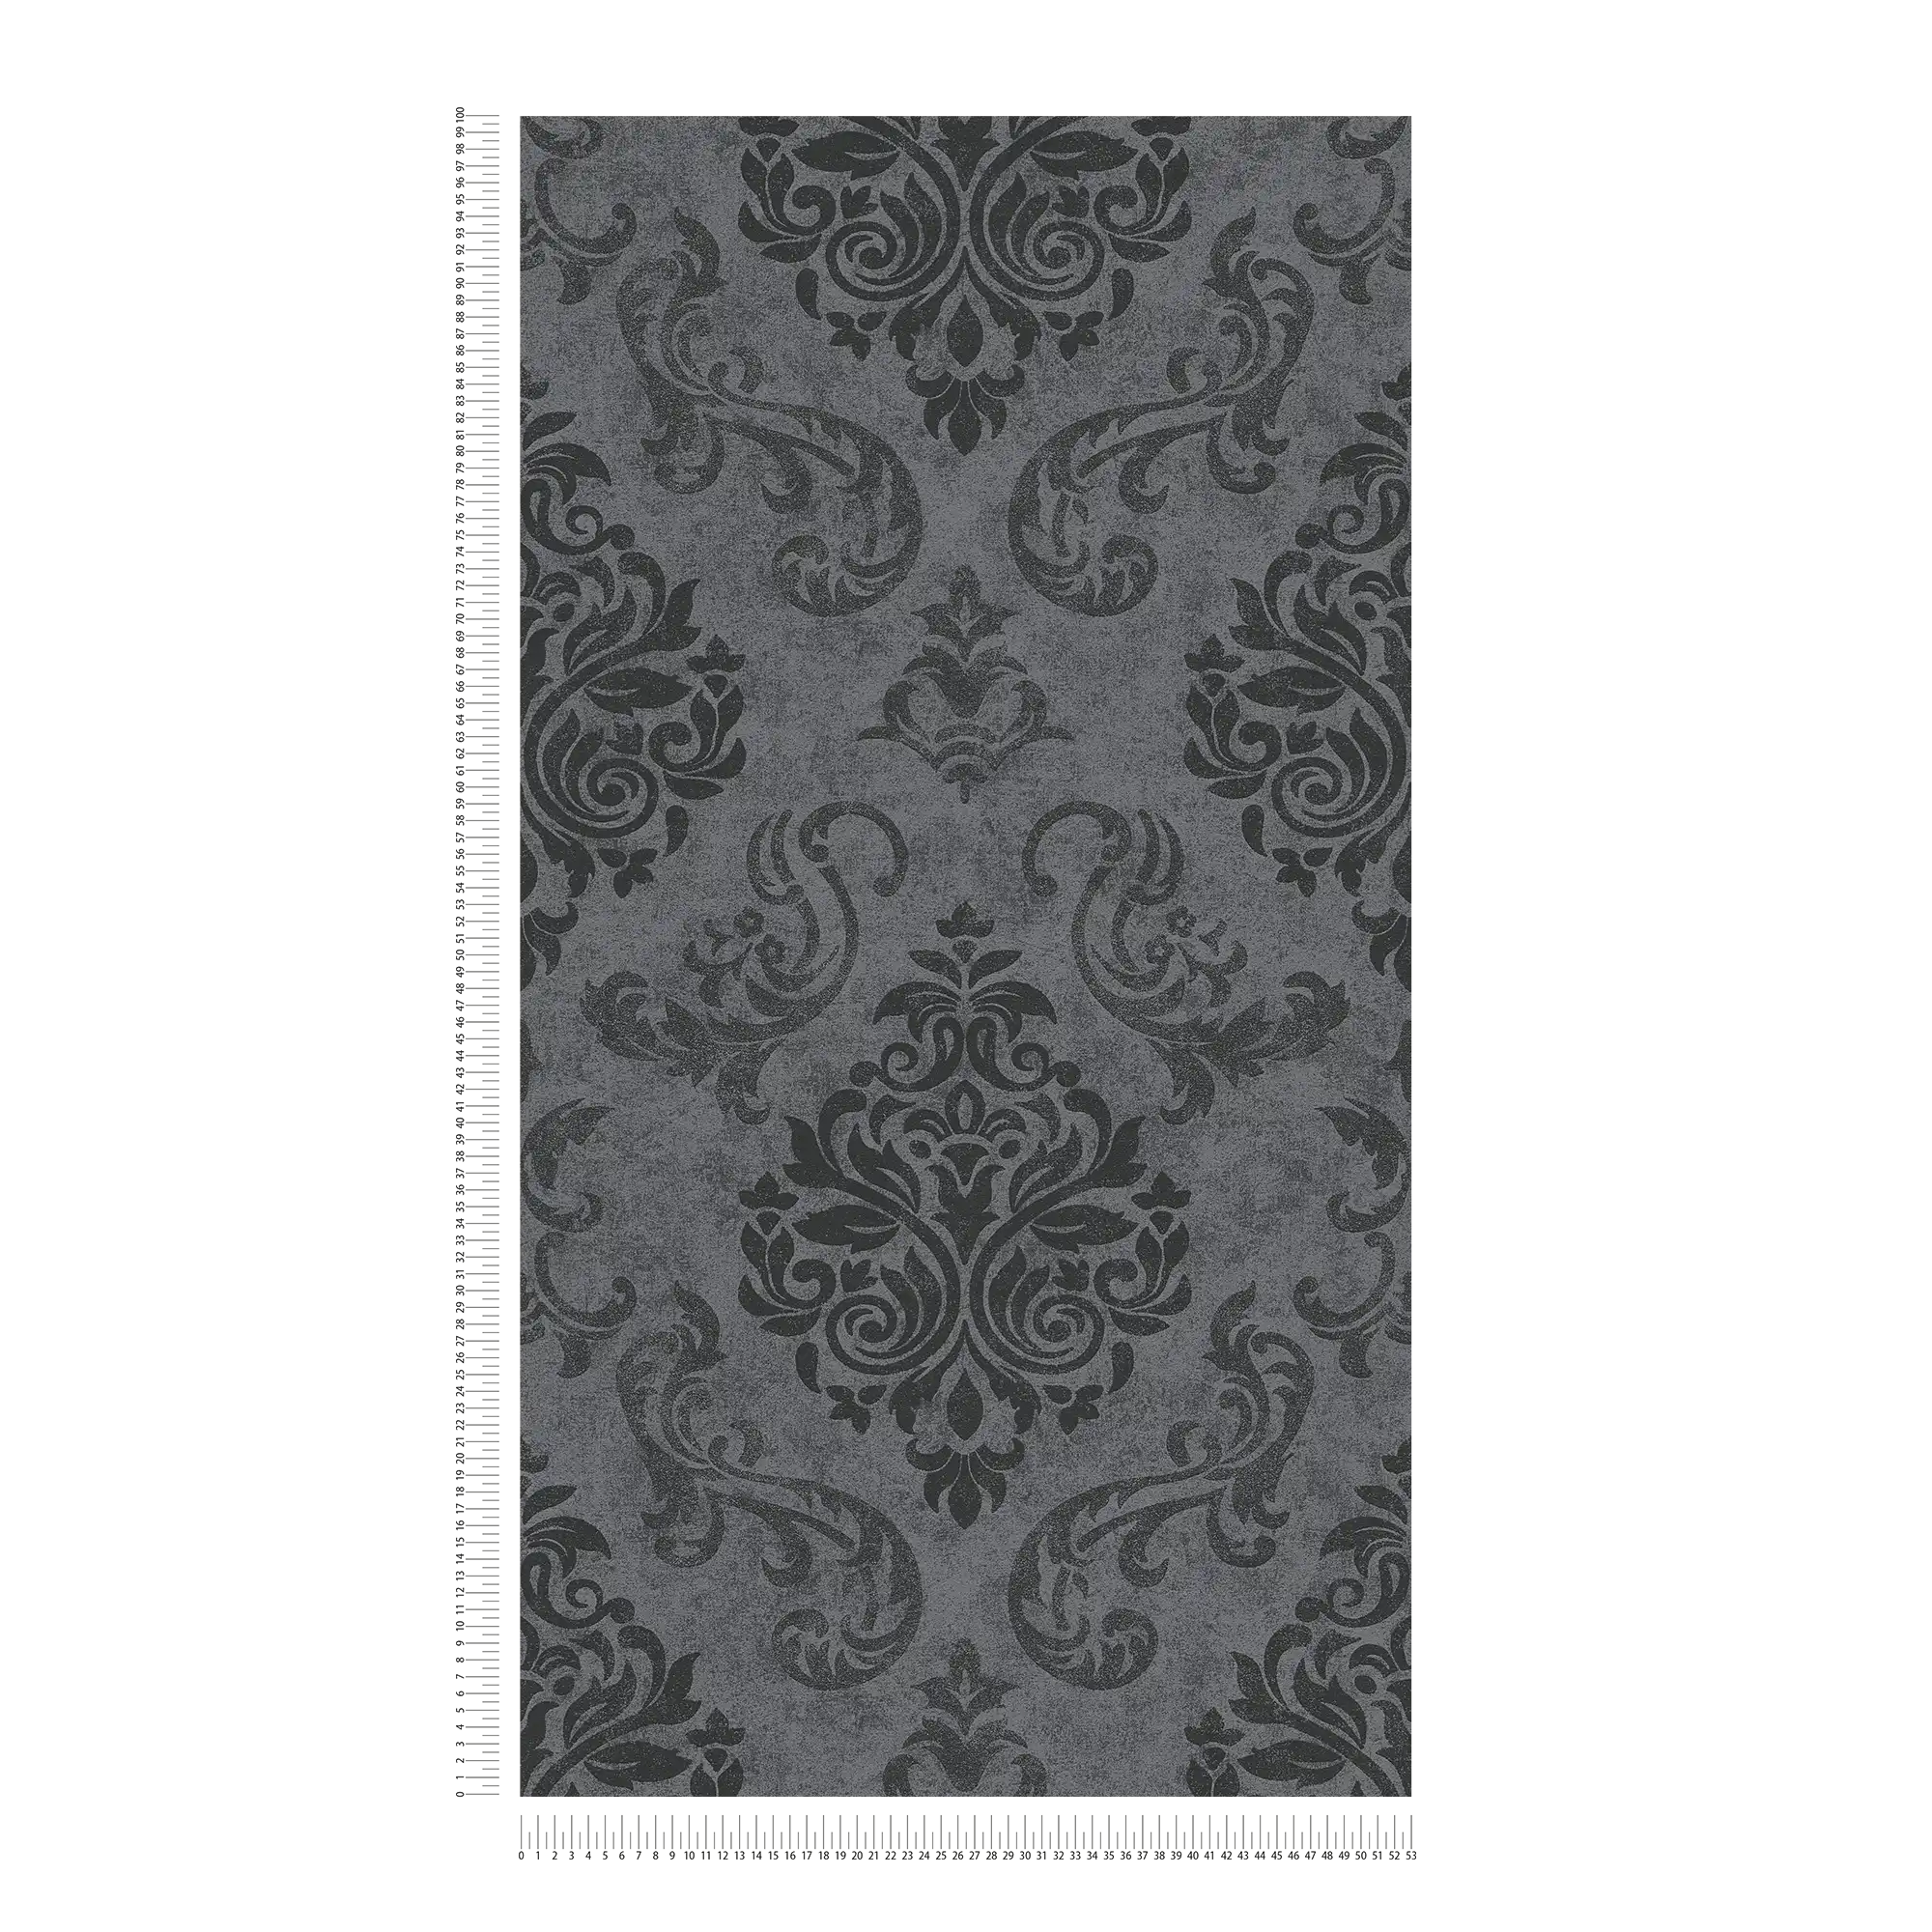             Ornaments wallpaper baroque style with glitter effect - grey, metallic, black
        